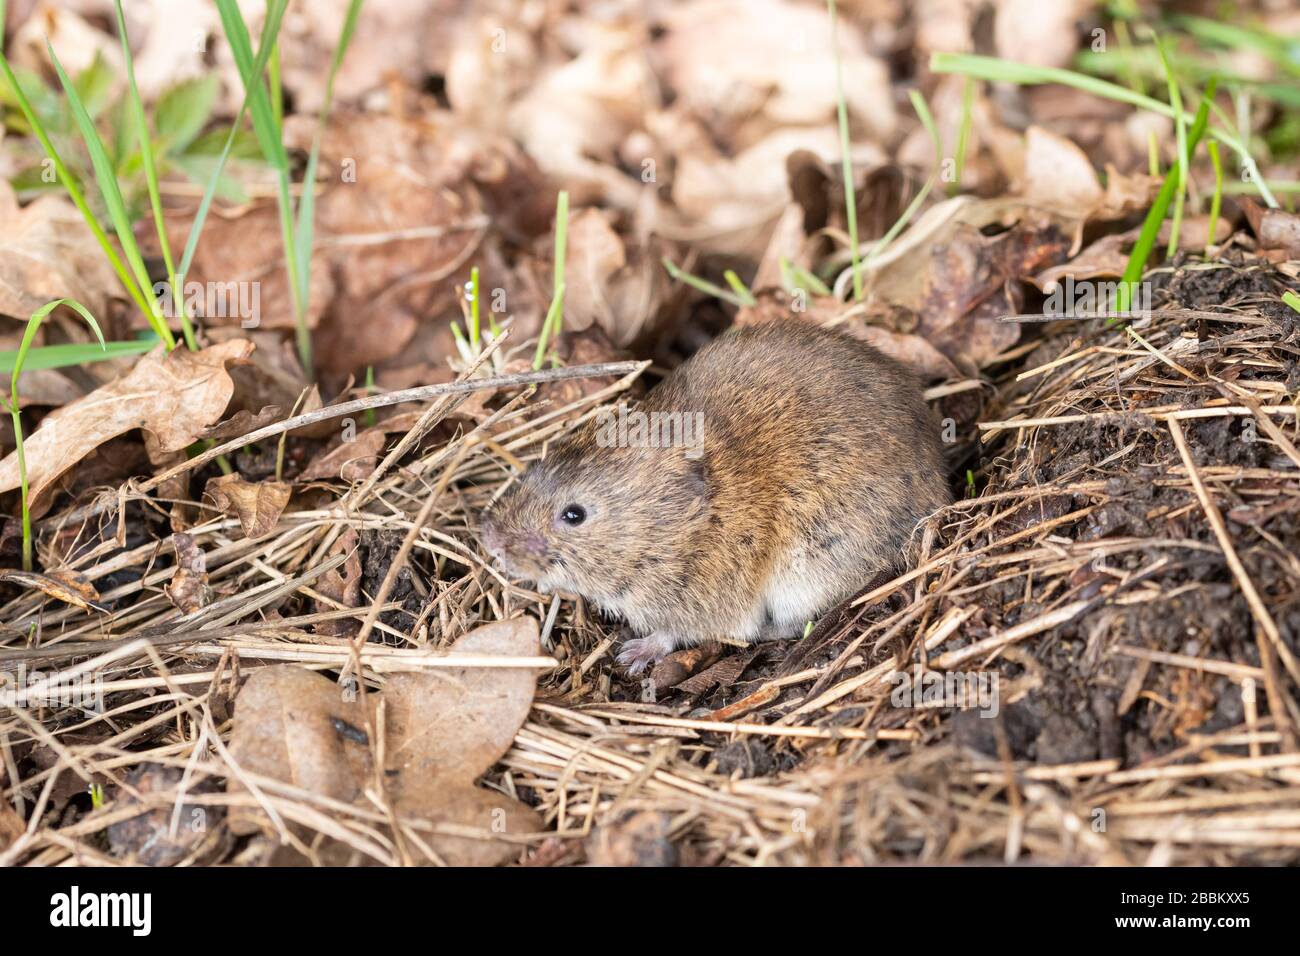 Field vole (Microtus agrestis) also called short-tailed vole, small UK mammal Stock Photo